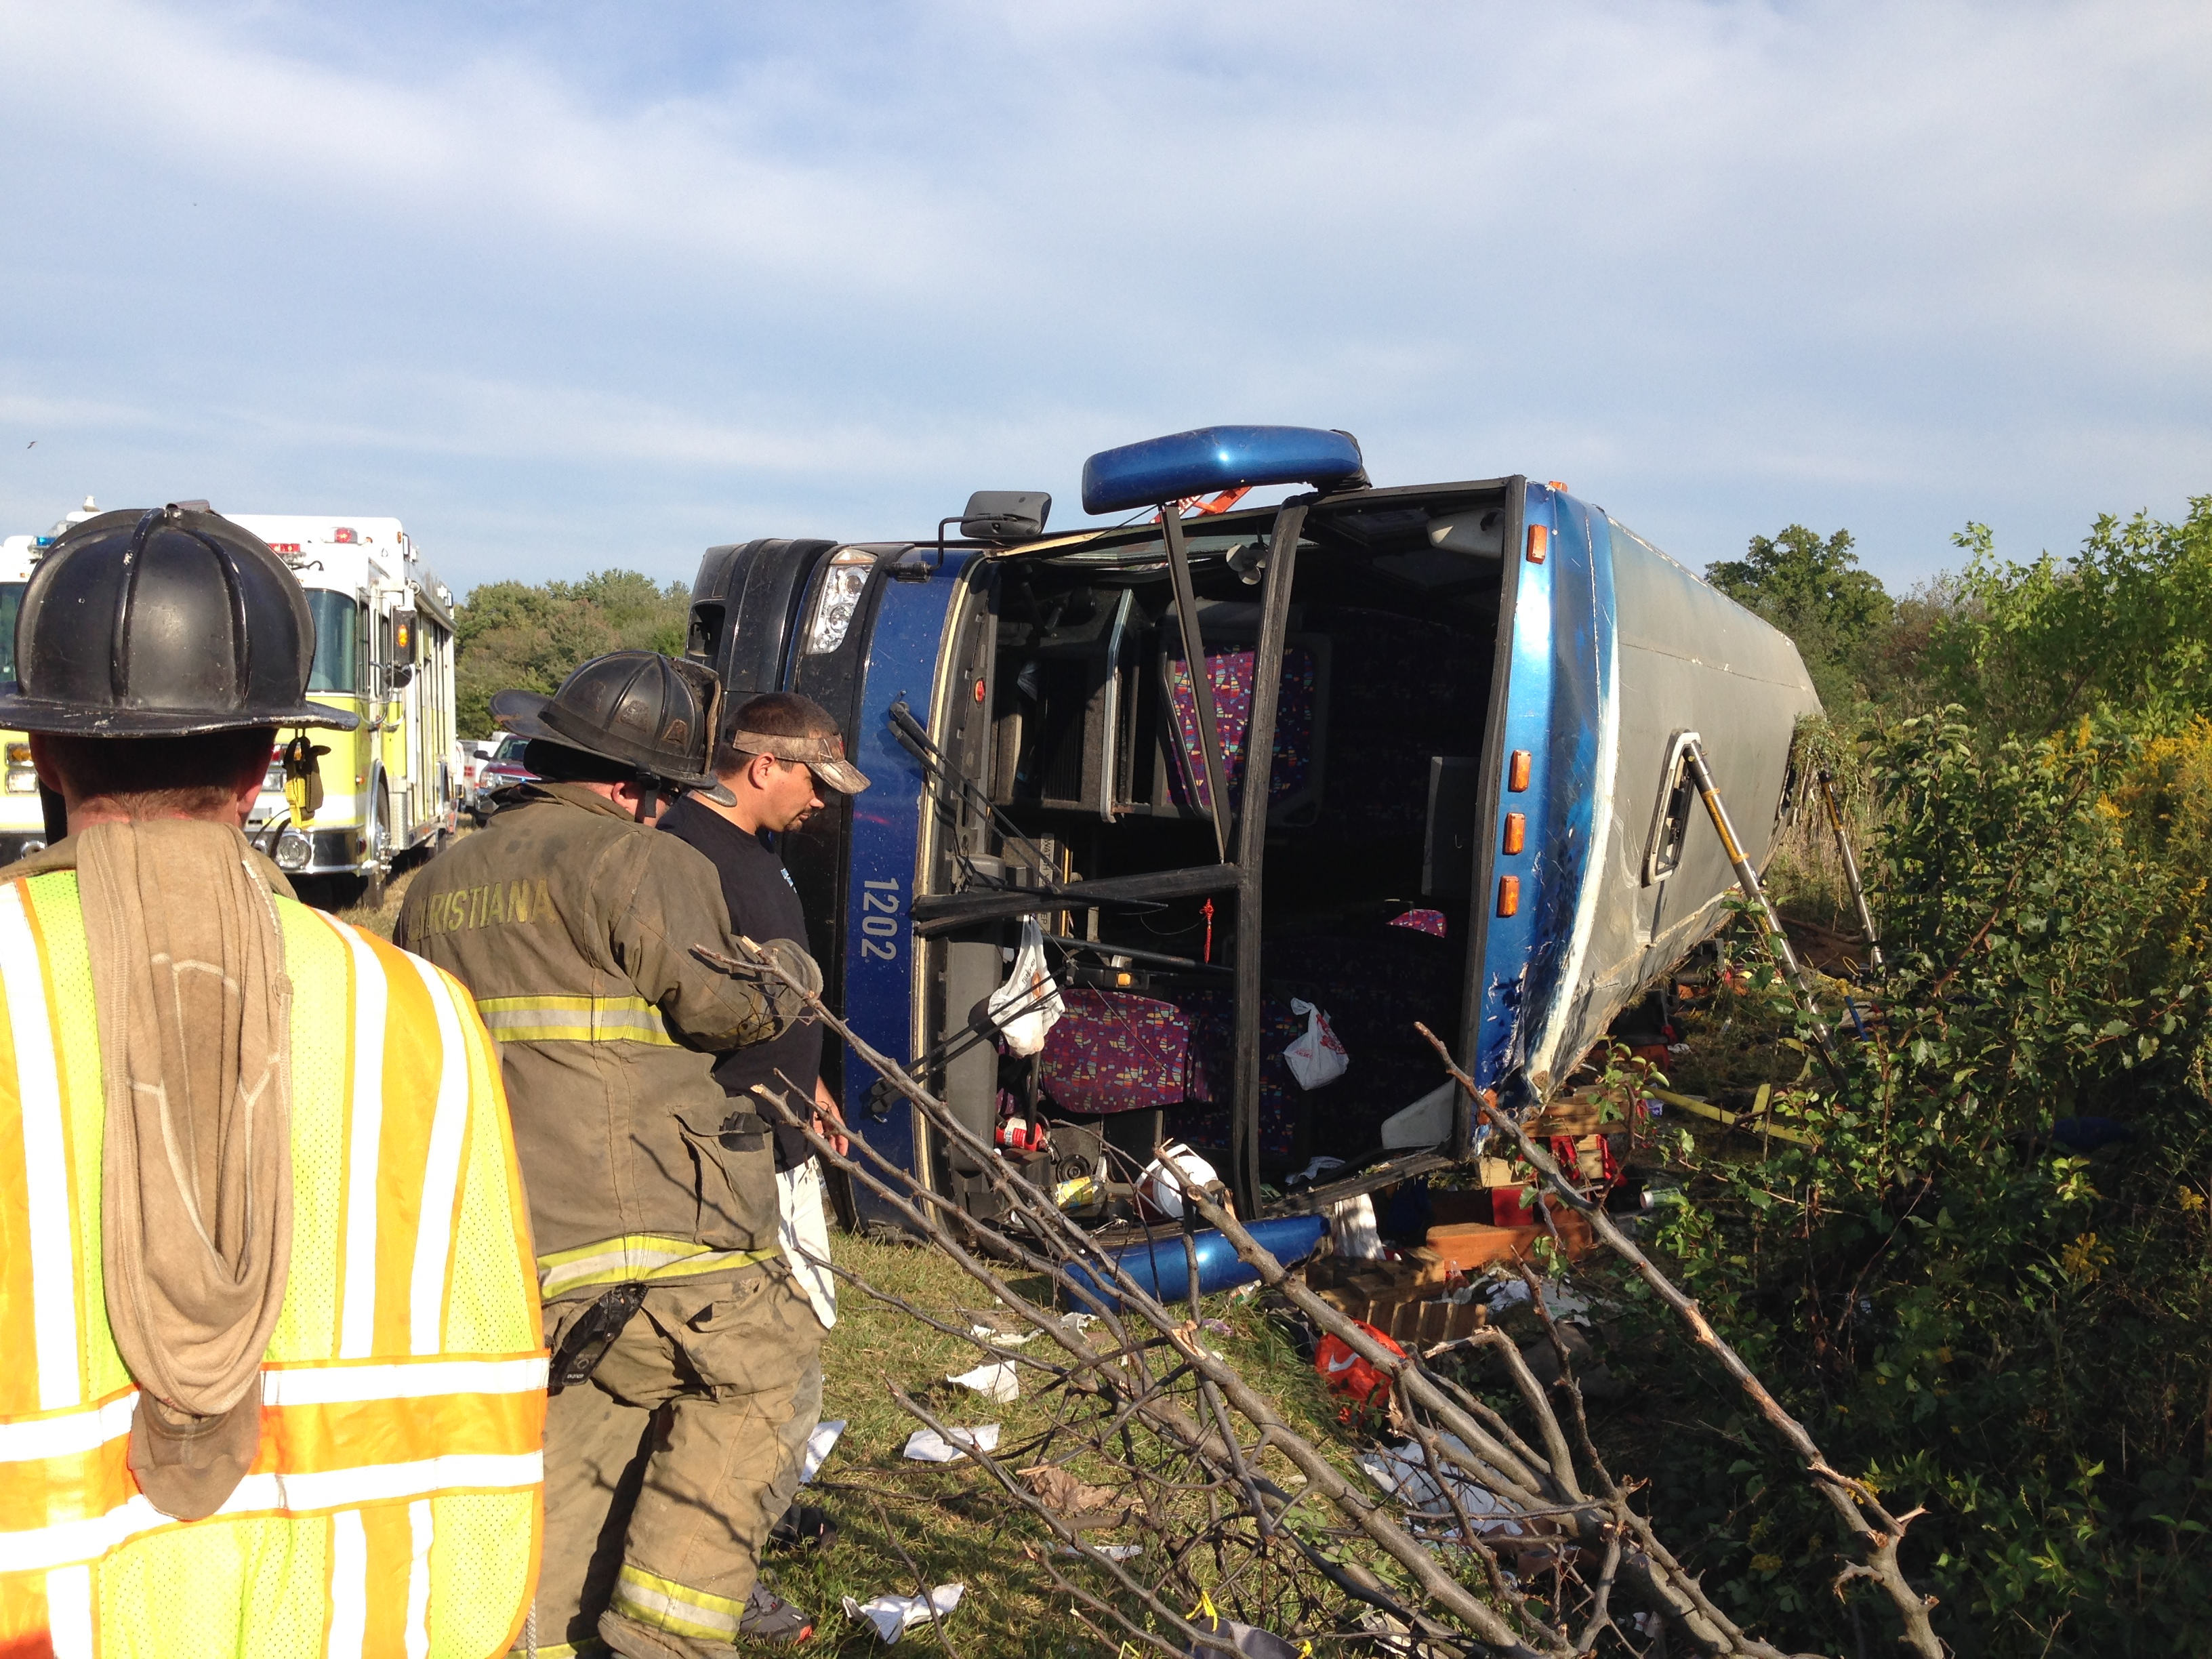 Passengers from a tour bus are treated for injuries near the overturned bus at the Tybouts Corner on ramp from southbound Del. 1 to Red Lion Road in Bear, Del. on Sept. 21, 2014. (John J. Jankowski—The Wilmington News-Journal/AP)